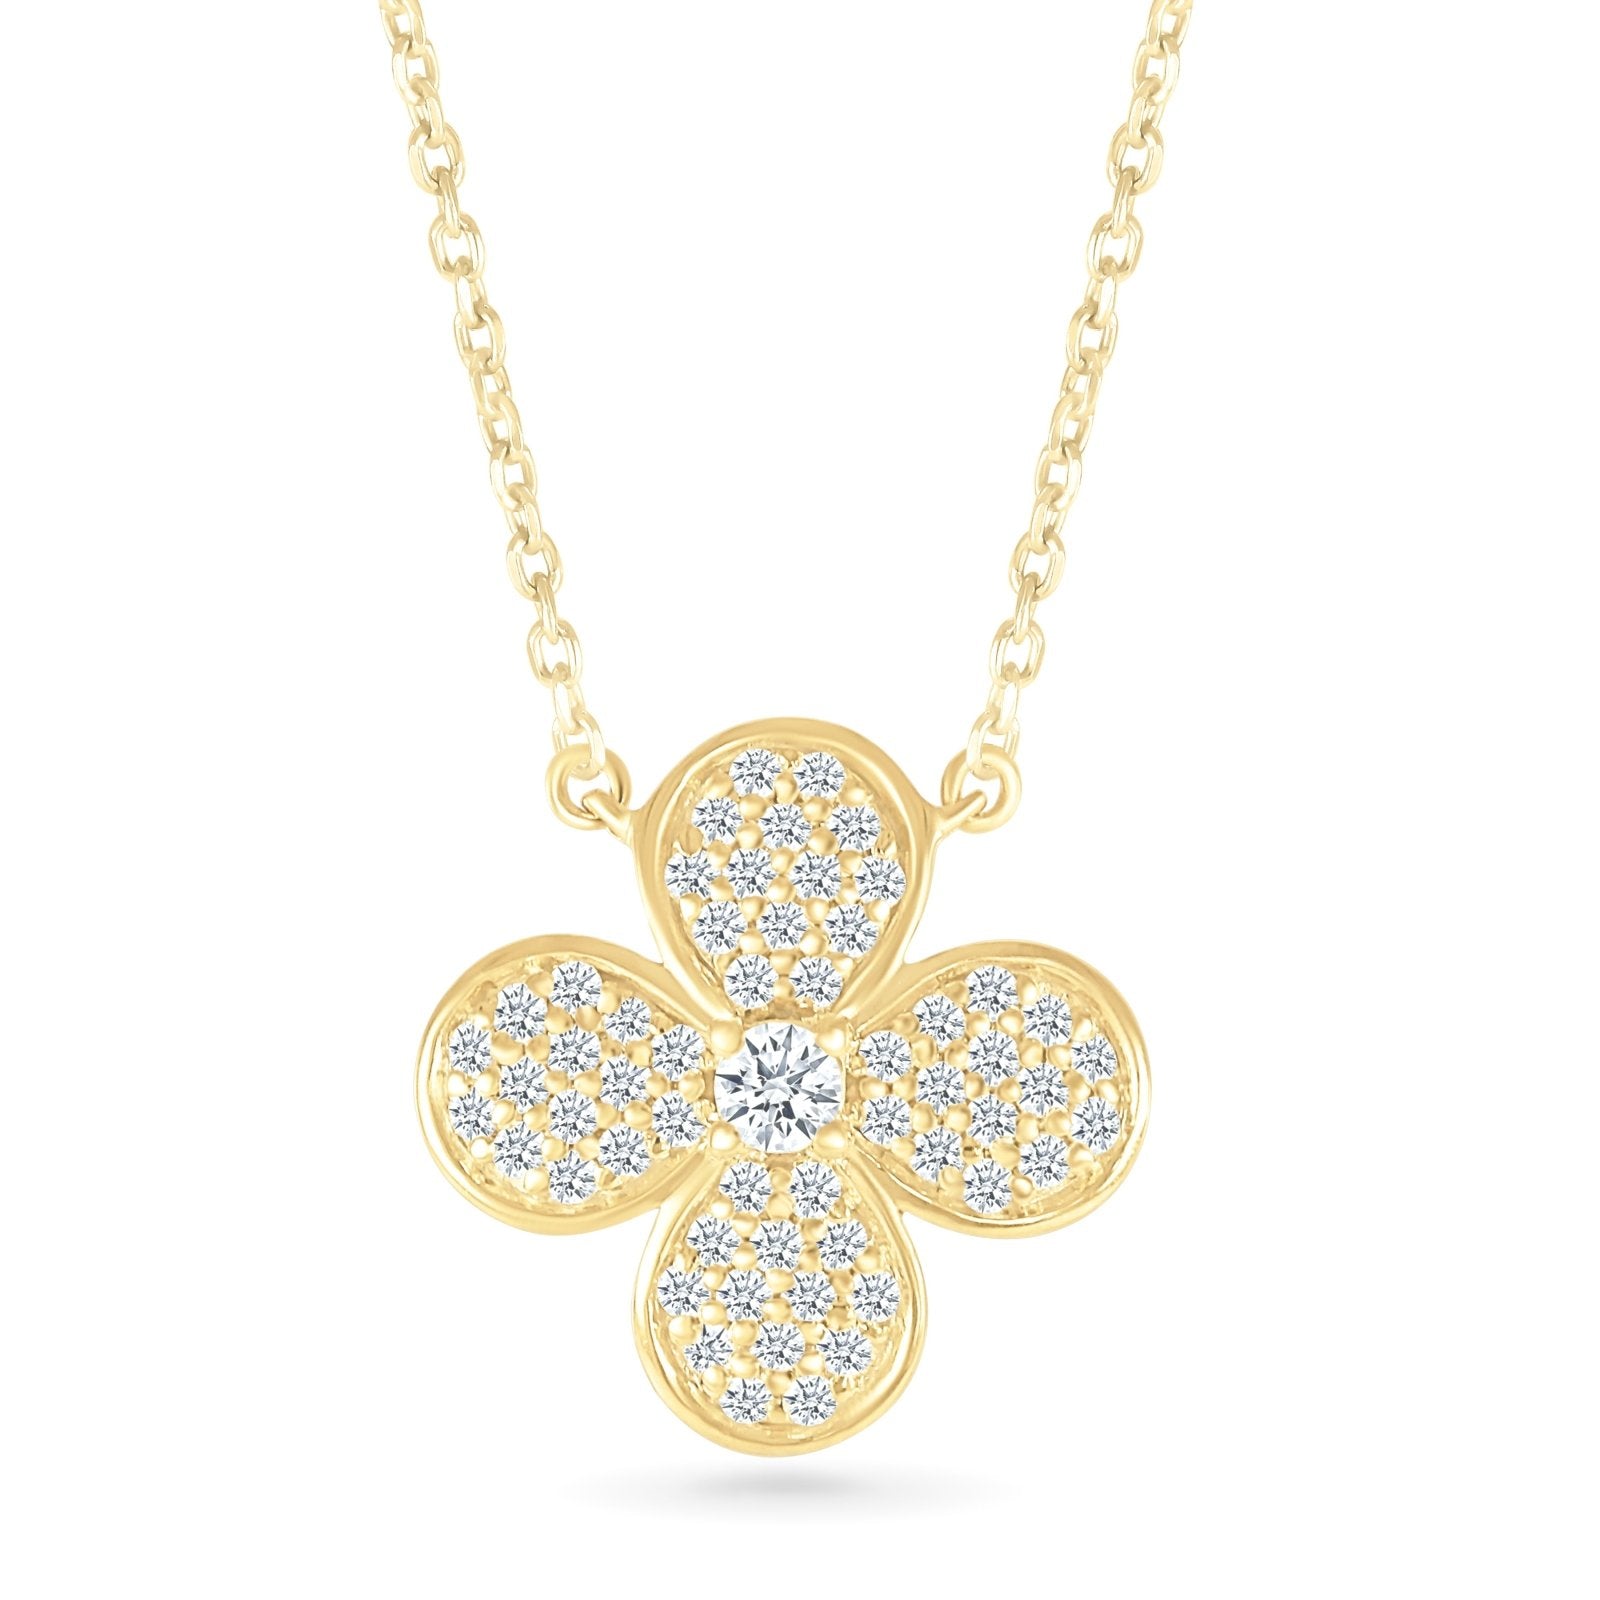 Four Petal Diamond Pave Flower Necklace Necklaces Estella Collection #product_description# 32698 10k April Birthstone Colorless Gemstone #tag4# #tag5# #tag6# #tag7# #tag8# #tag9# #tag10#